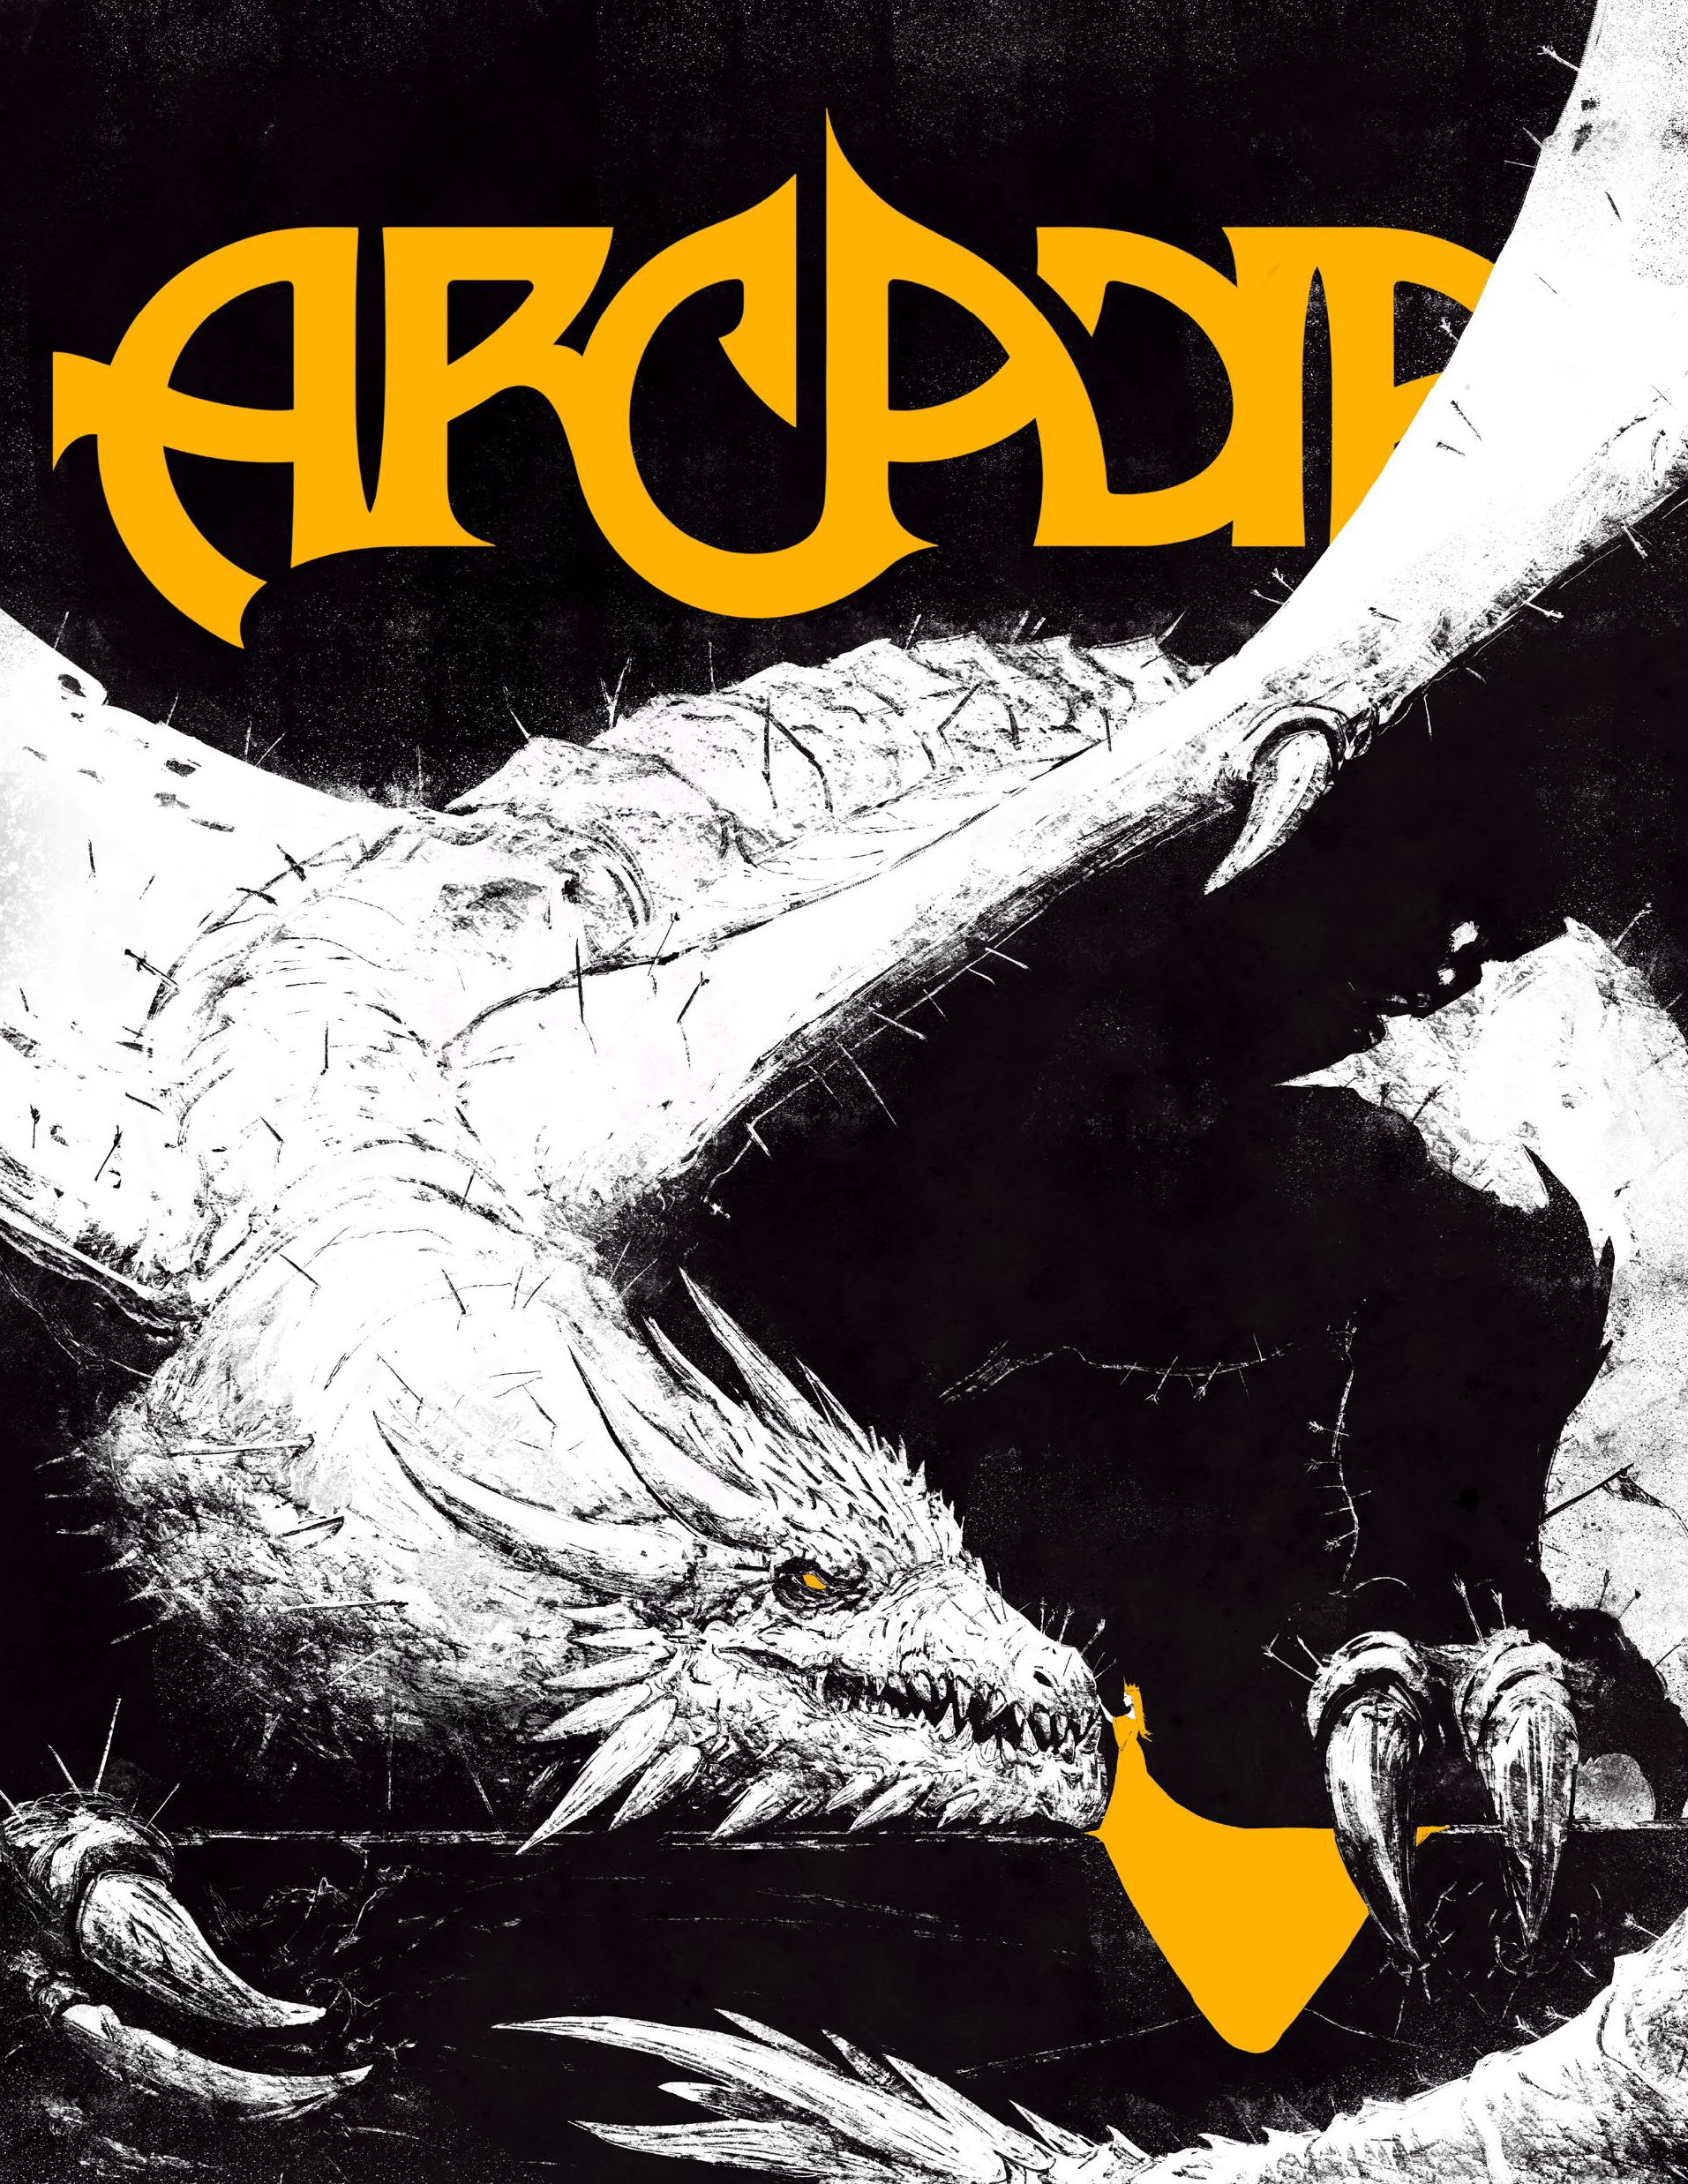 ARCADIA 13. ARCADIA 13 is here! This issue contains the following three articles and has cover from Nick De Spain.